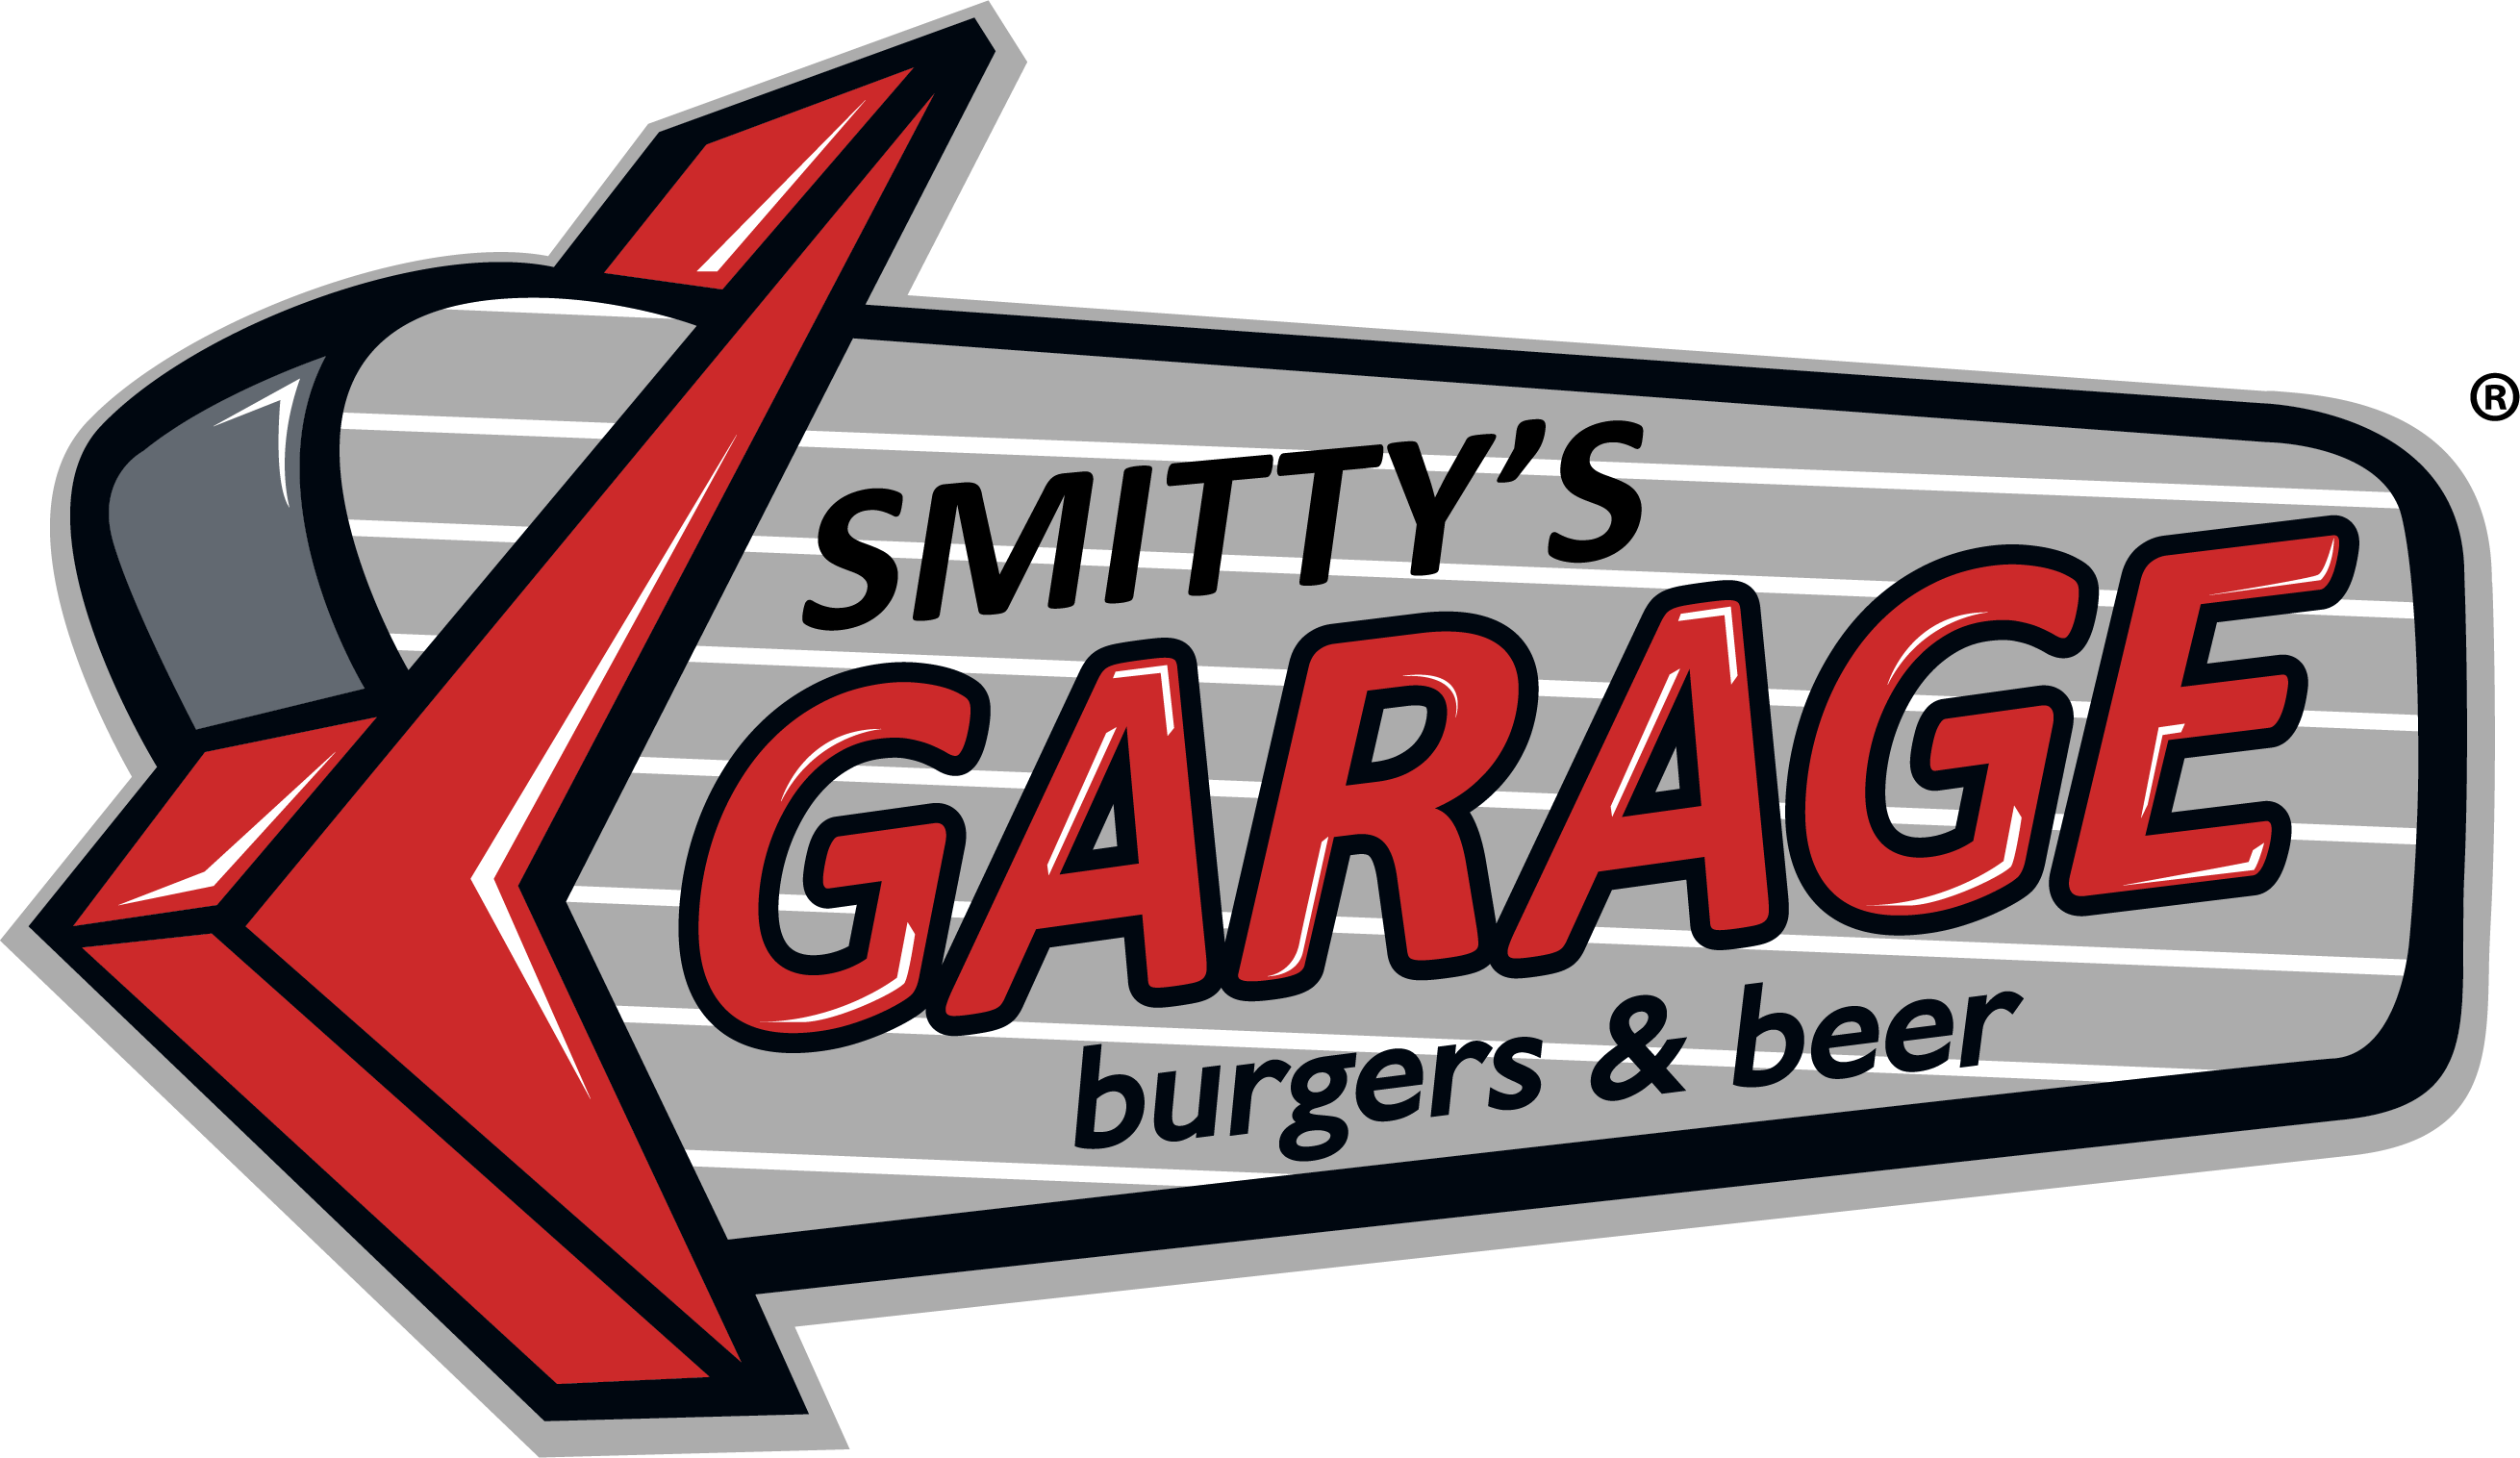 Burgers Logo - The Garage. Get the Finest Burgers and Hamburgers in Town